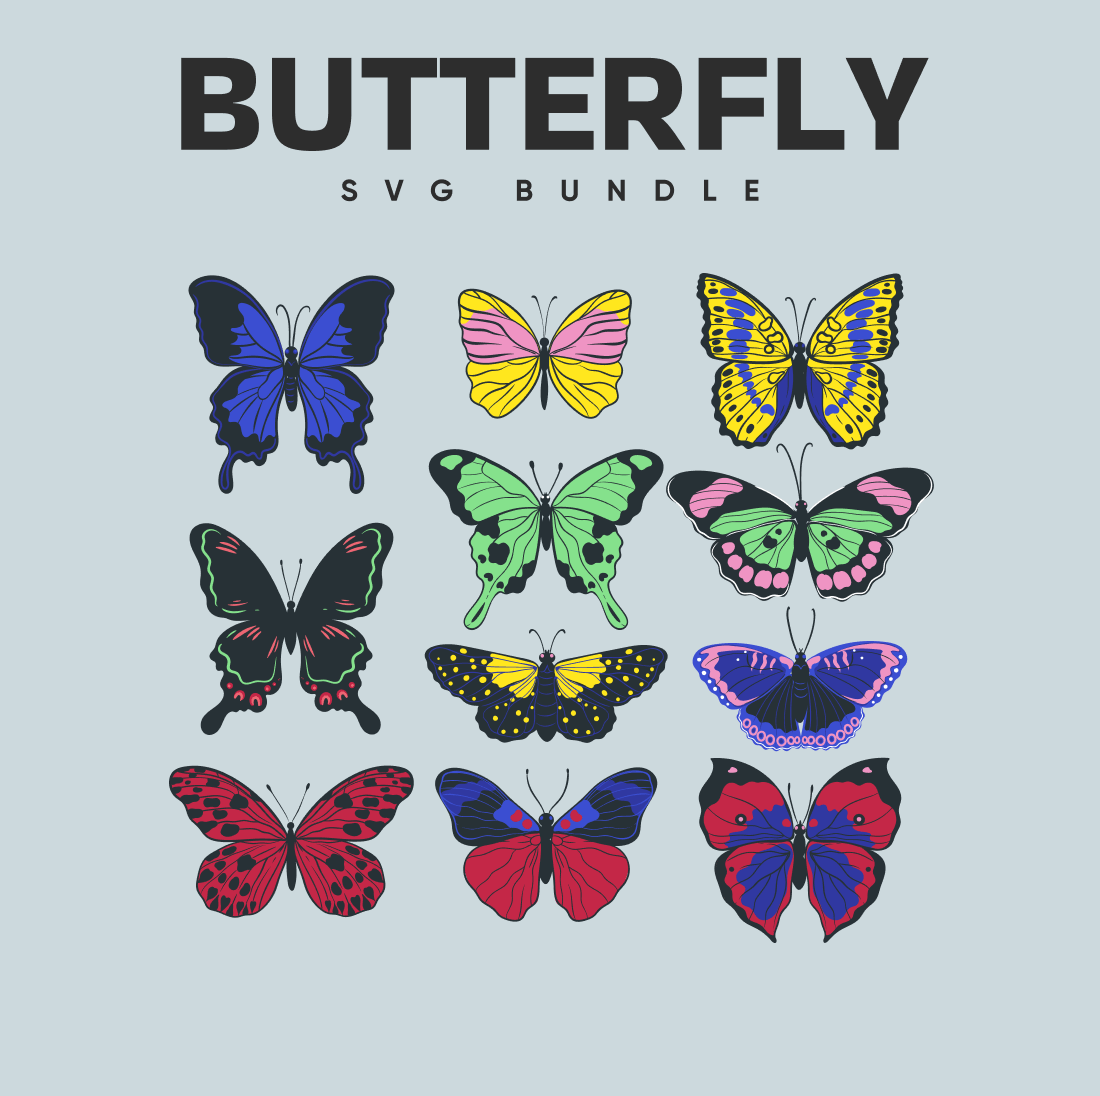 Bunch of butterflies with the words butterfly svg bundle.